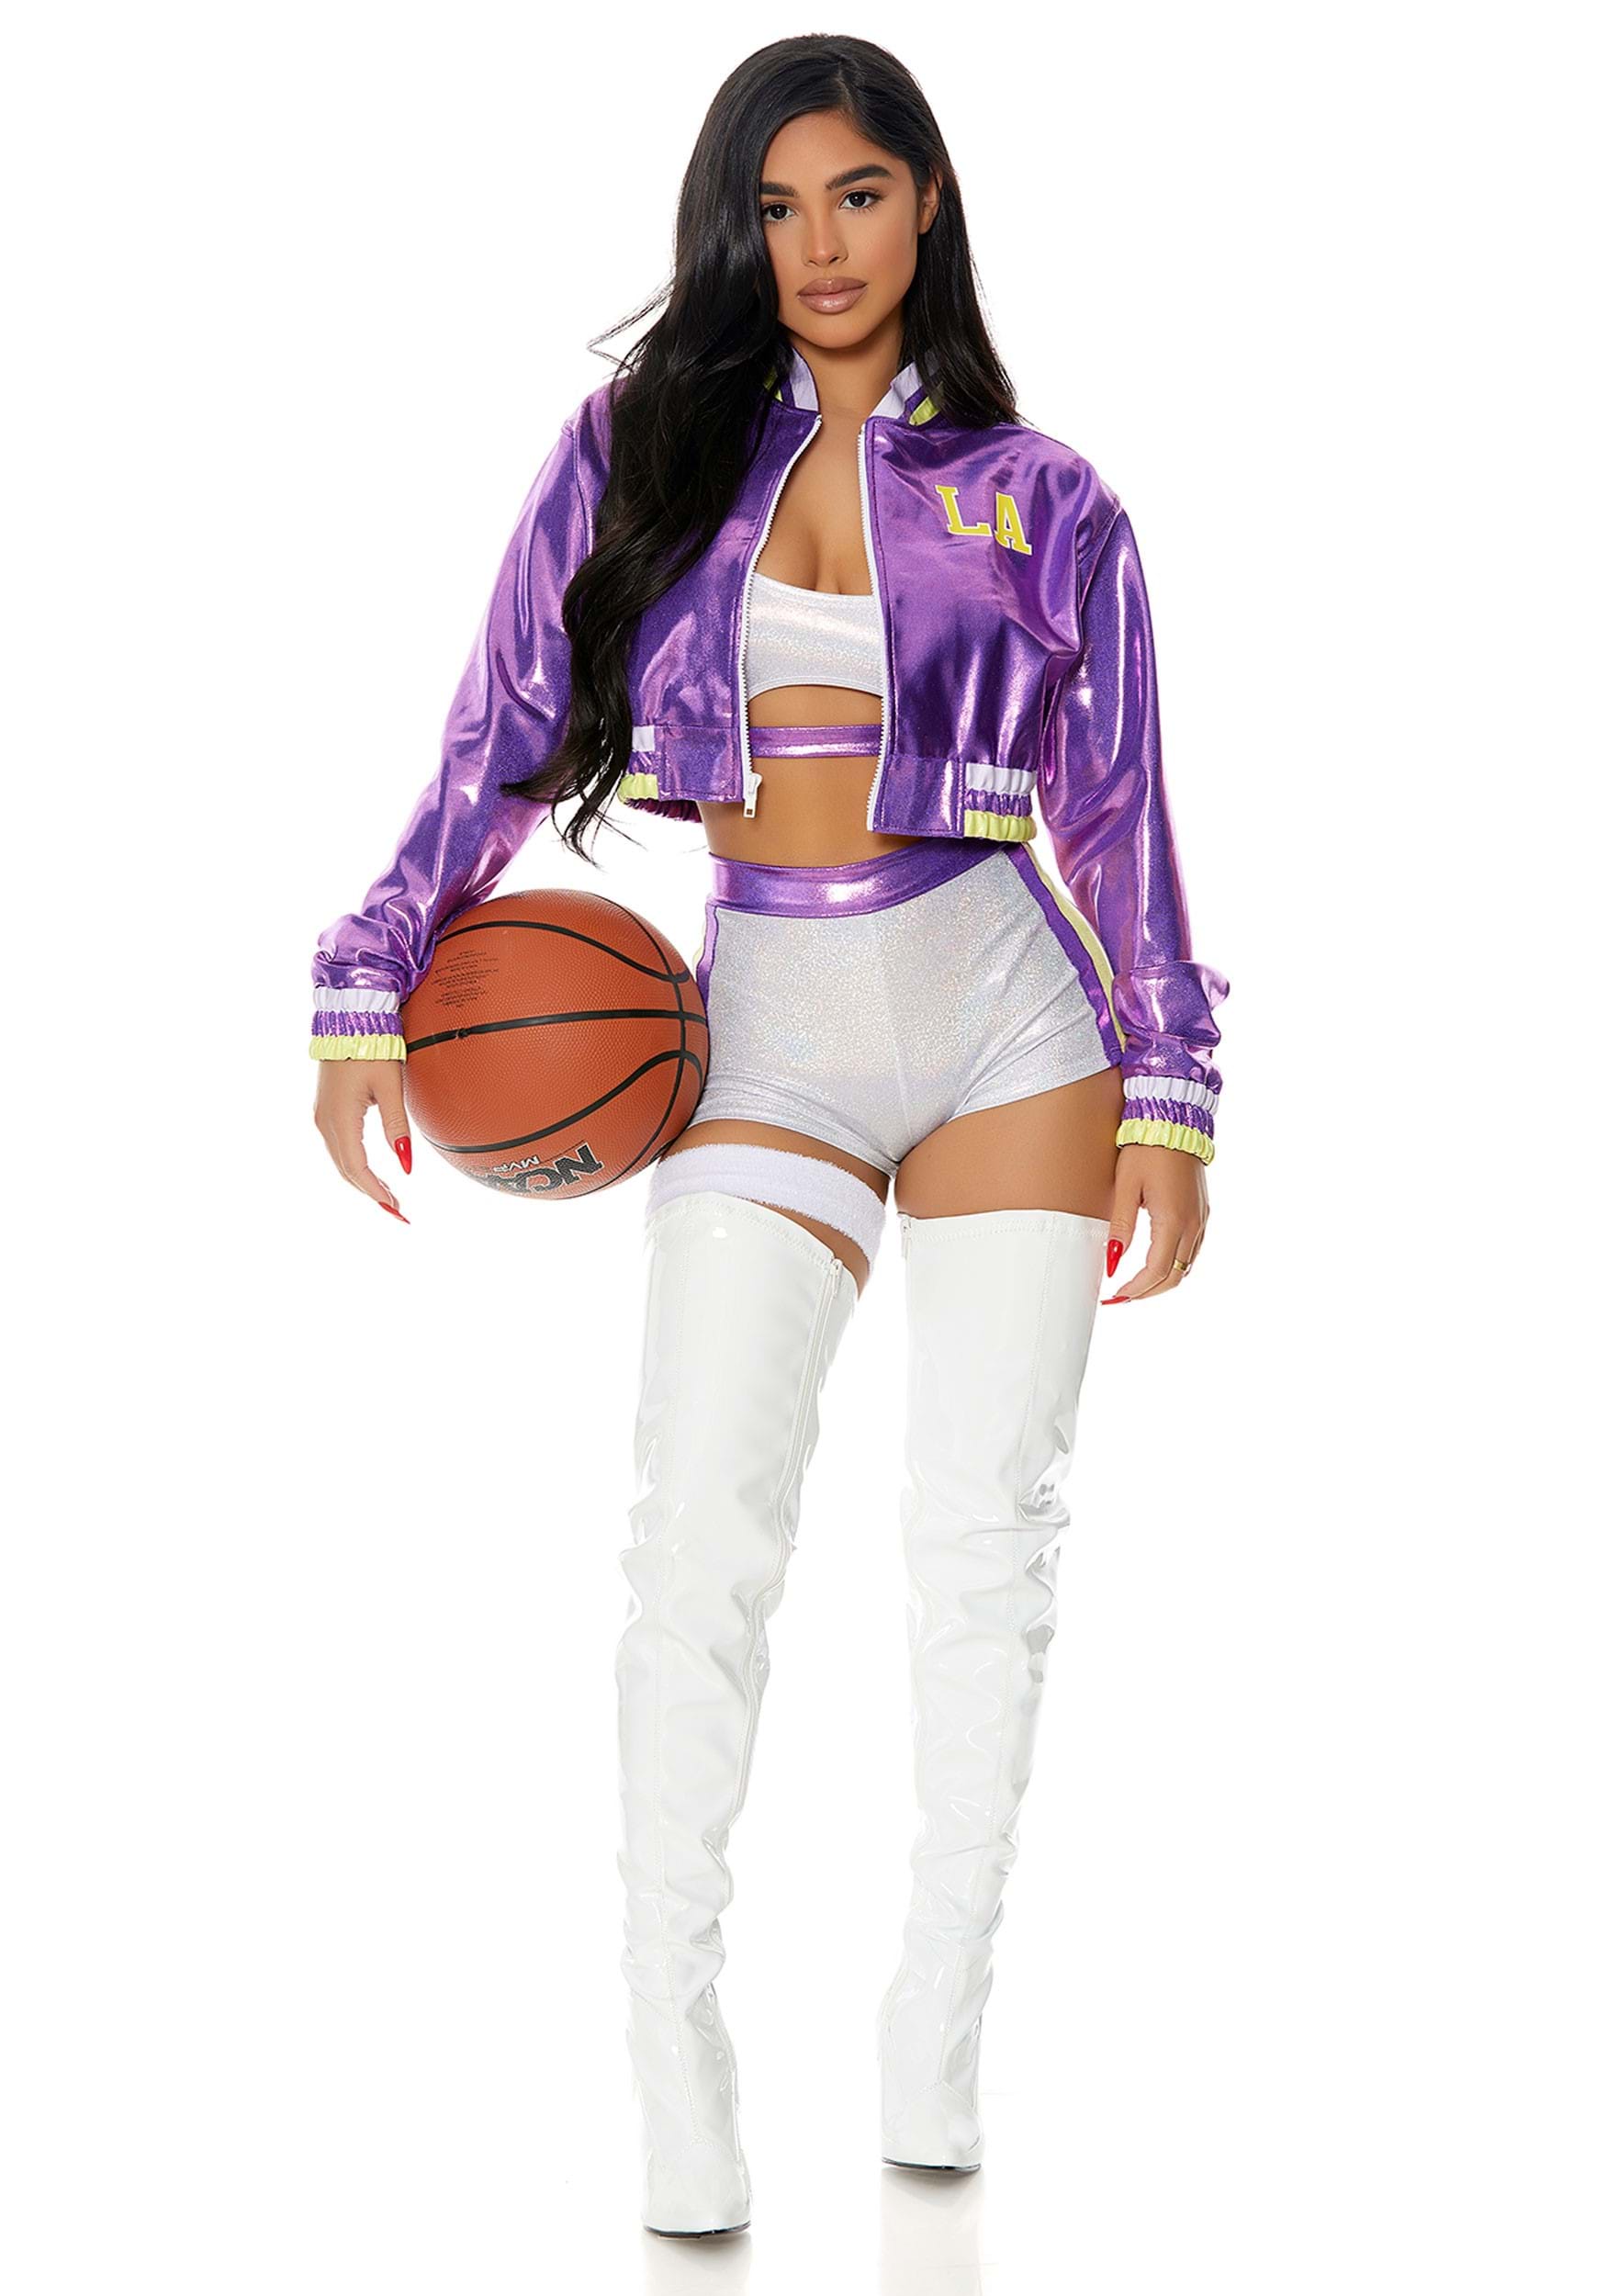 Image of Enjoy the Show Sexy Women's Basketball Player Costume ID FP551530-XS/S